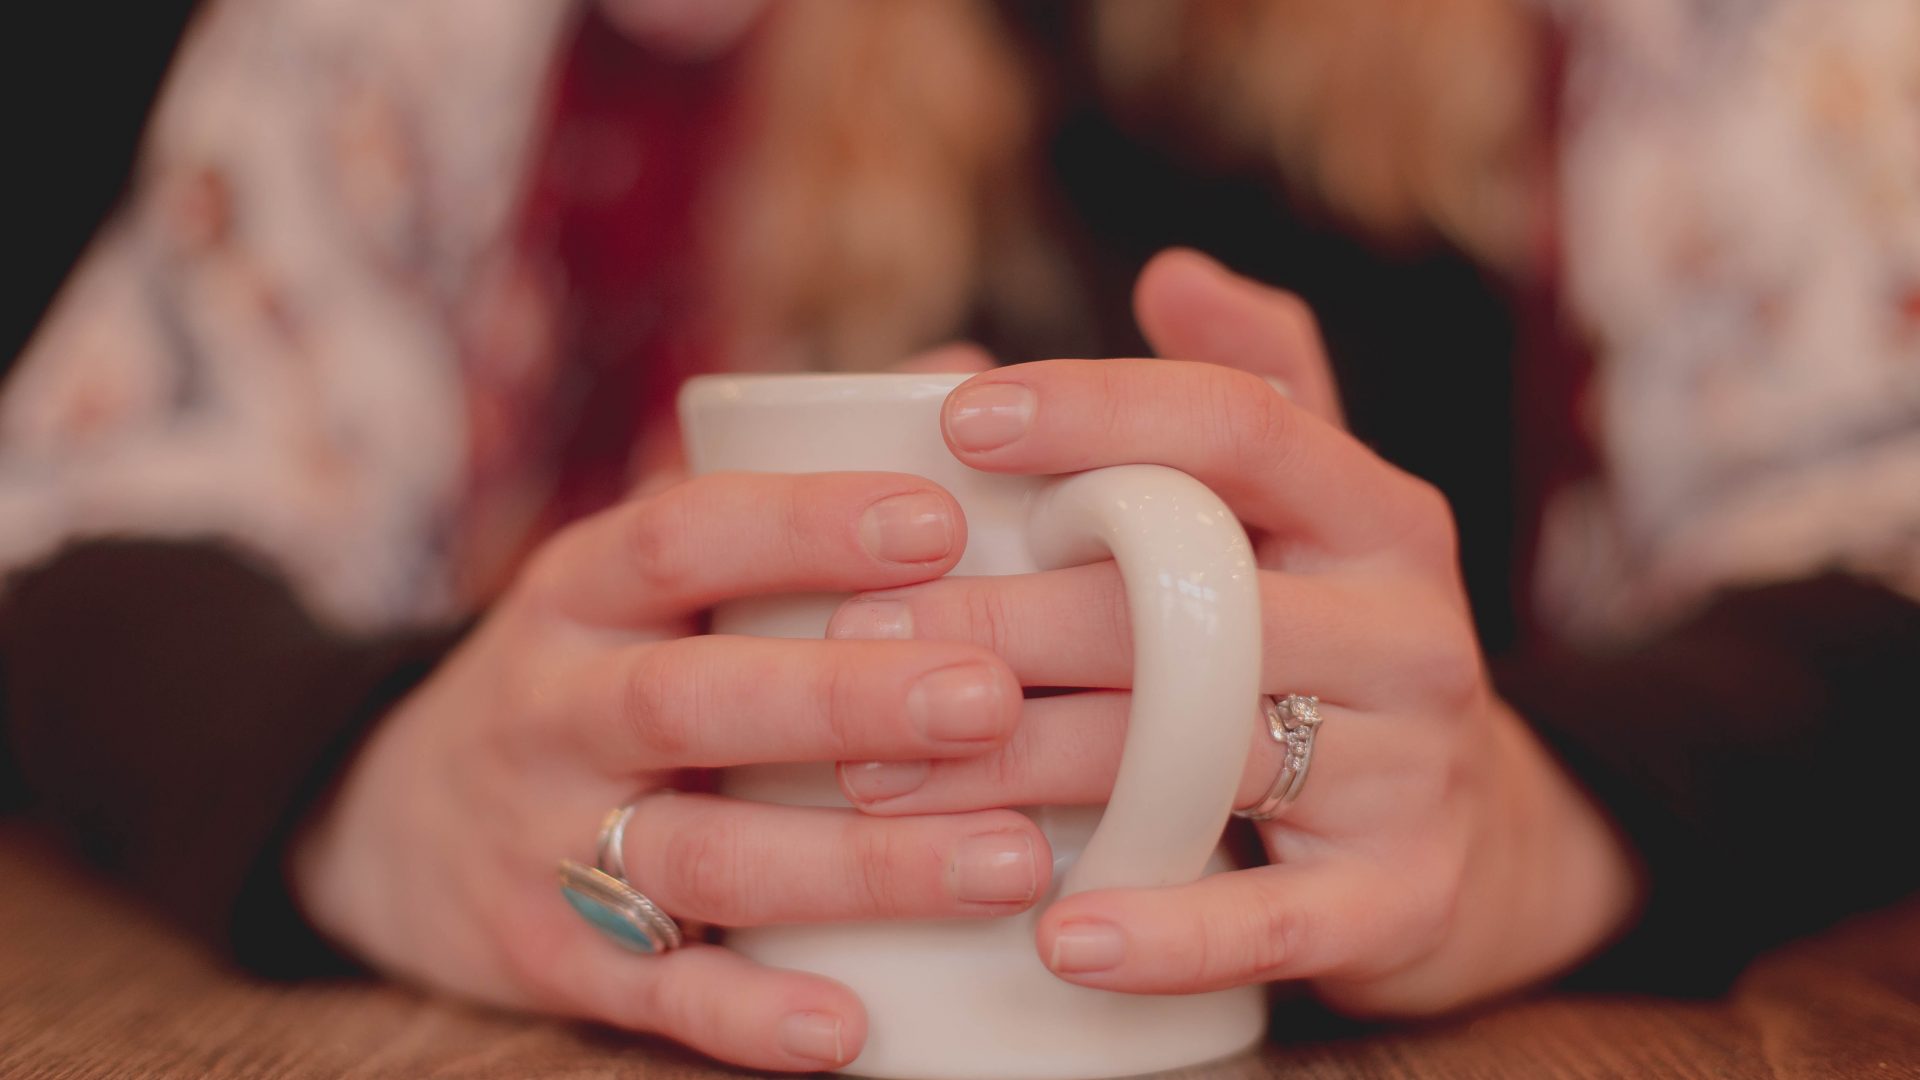 A person is holding a mug